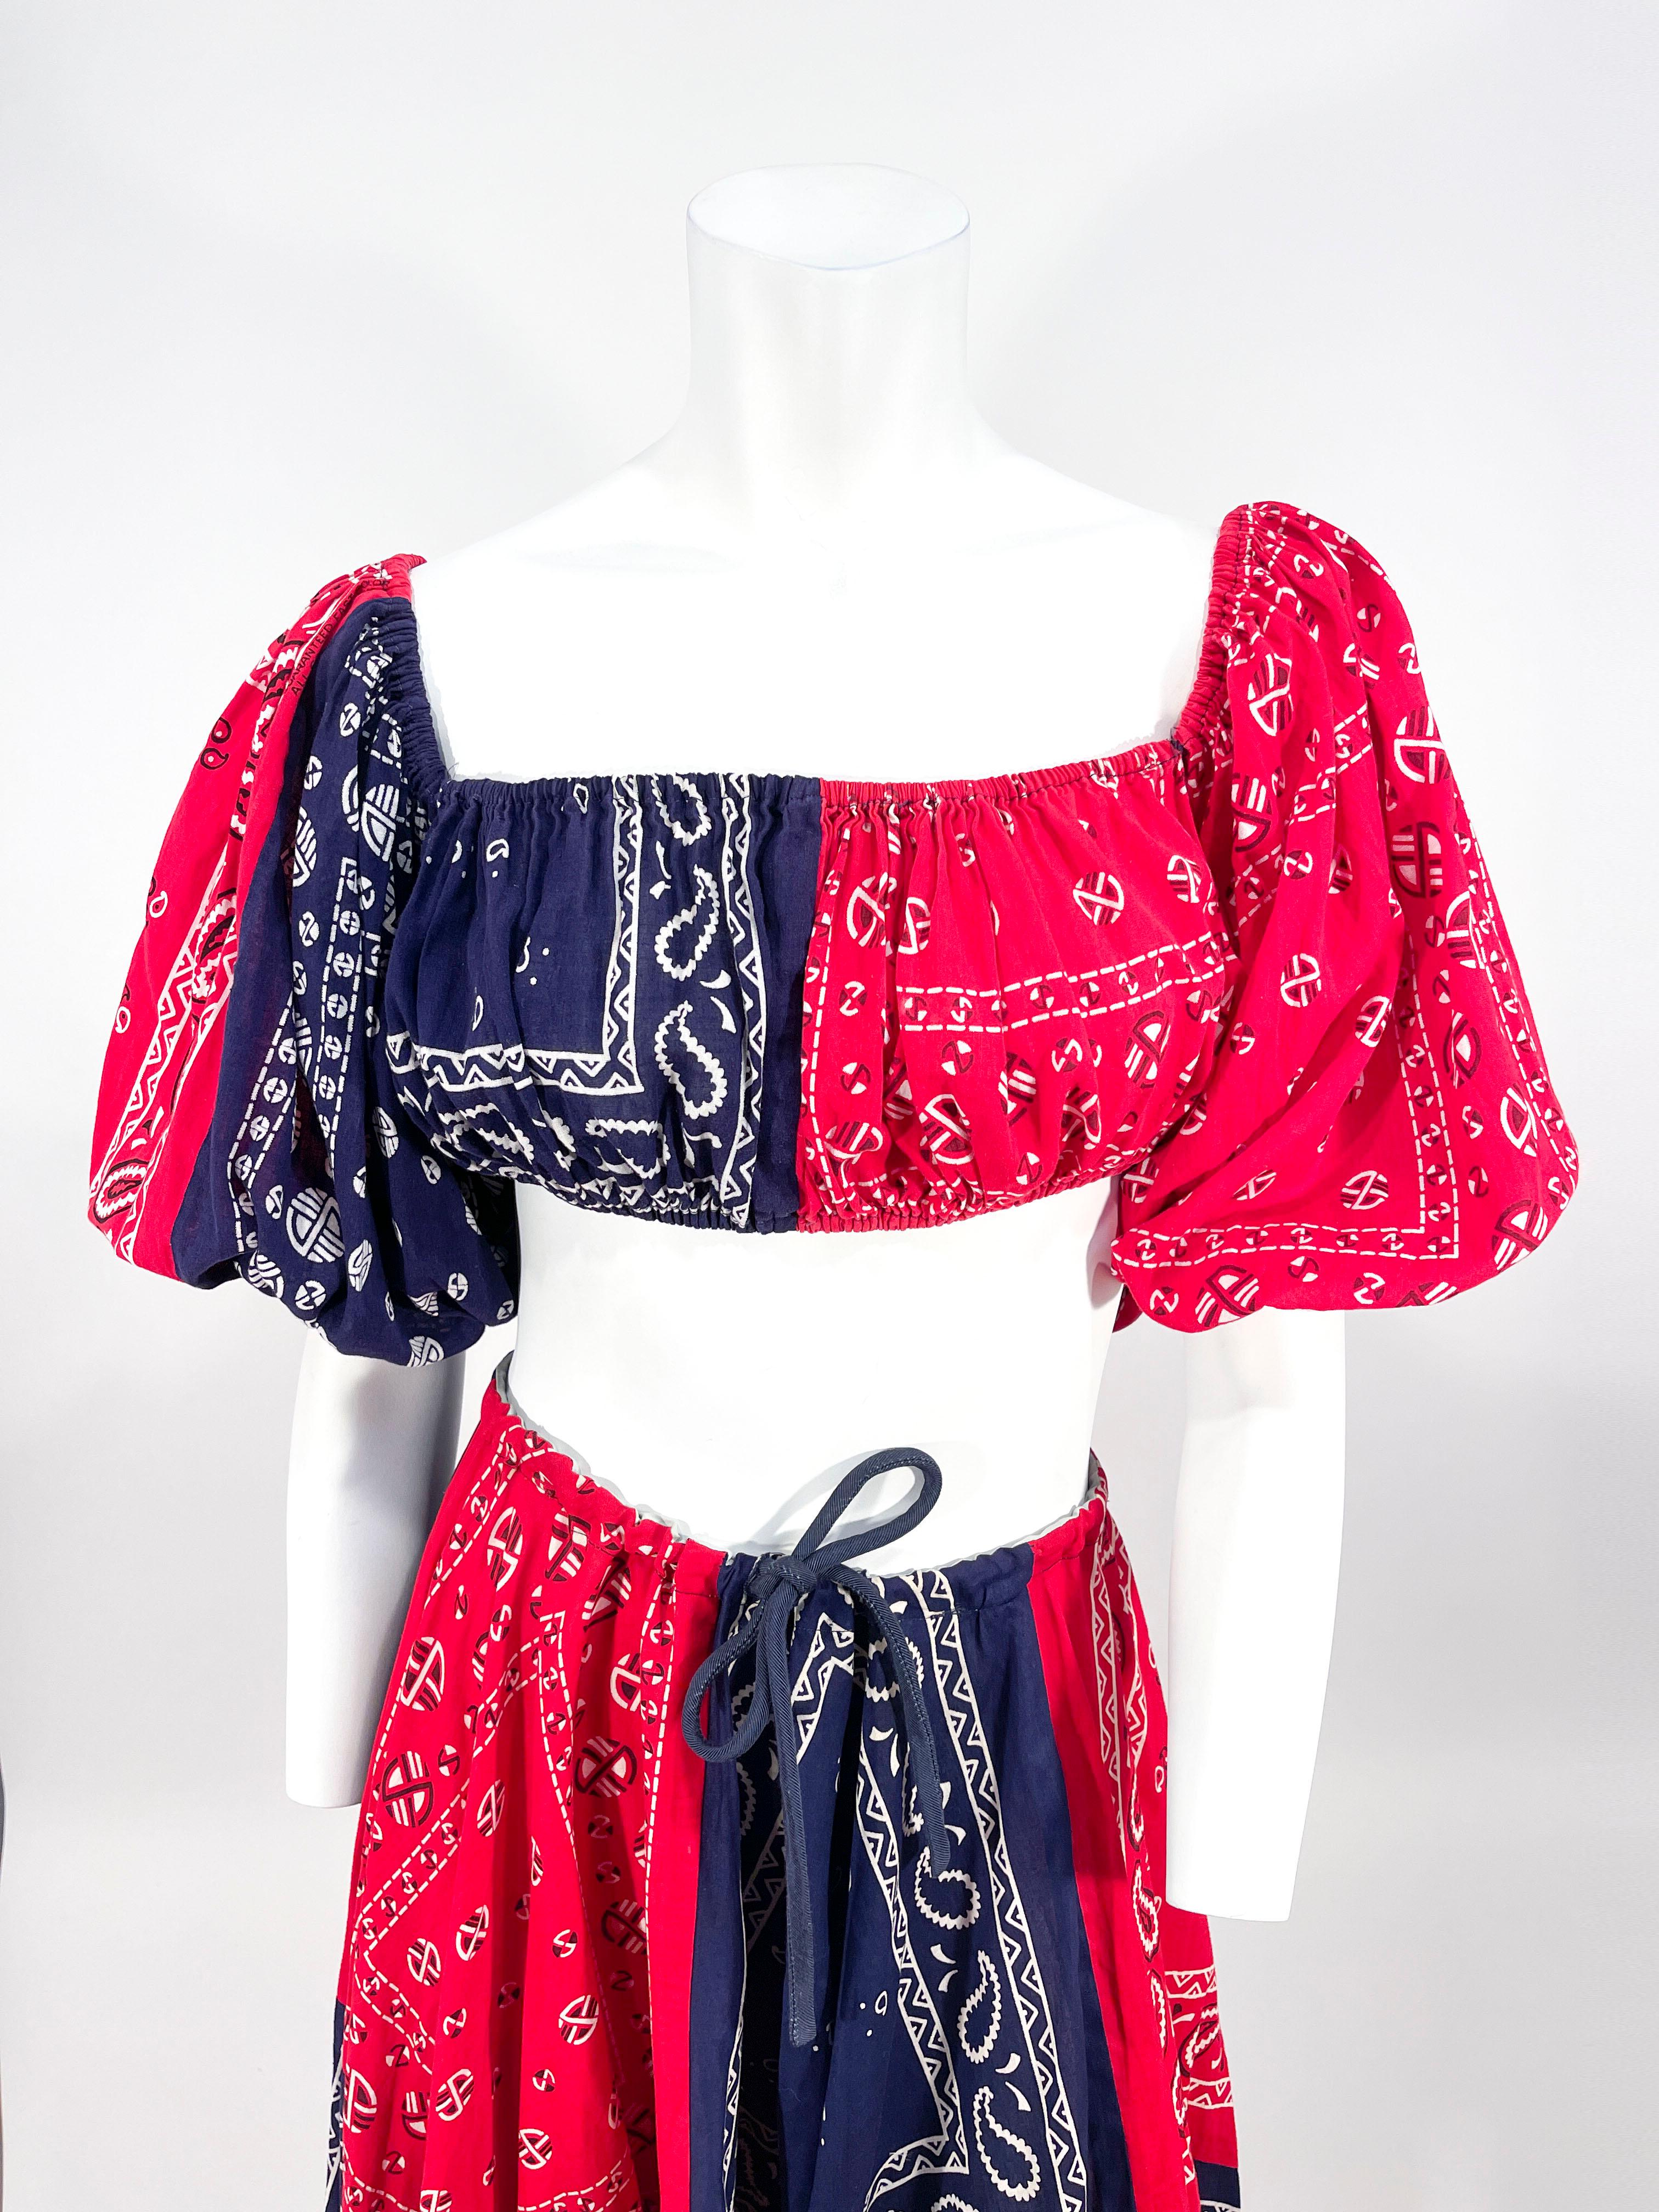 Late 1960s to early 1970s handmade red and blue bandana two-piece set. The peasant style top features full puff sleeves that may be worn on or off the shoulder due to the elasticated hems. The skirt has a handkerchief hem and a corded waist tie to